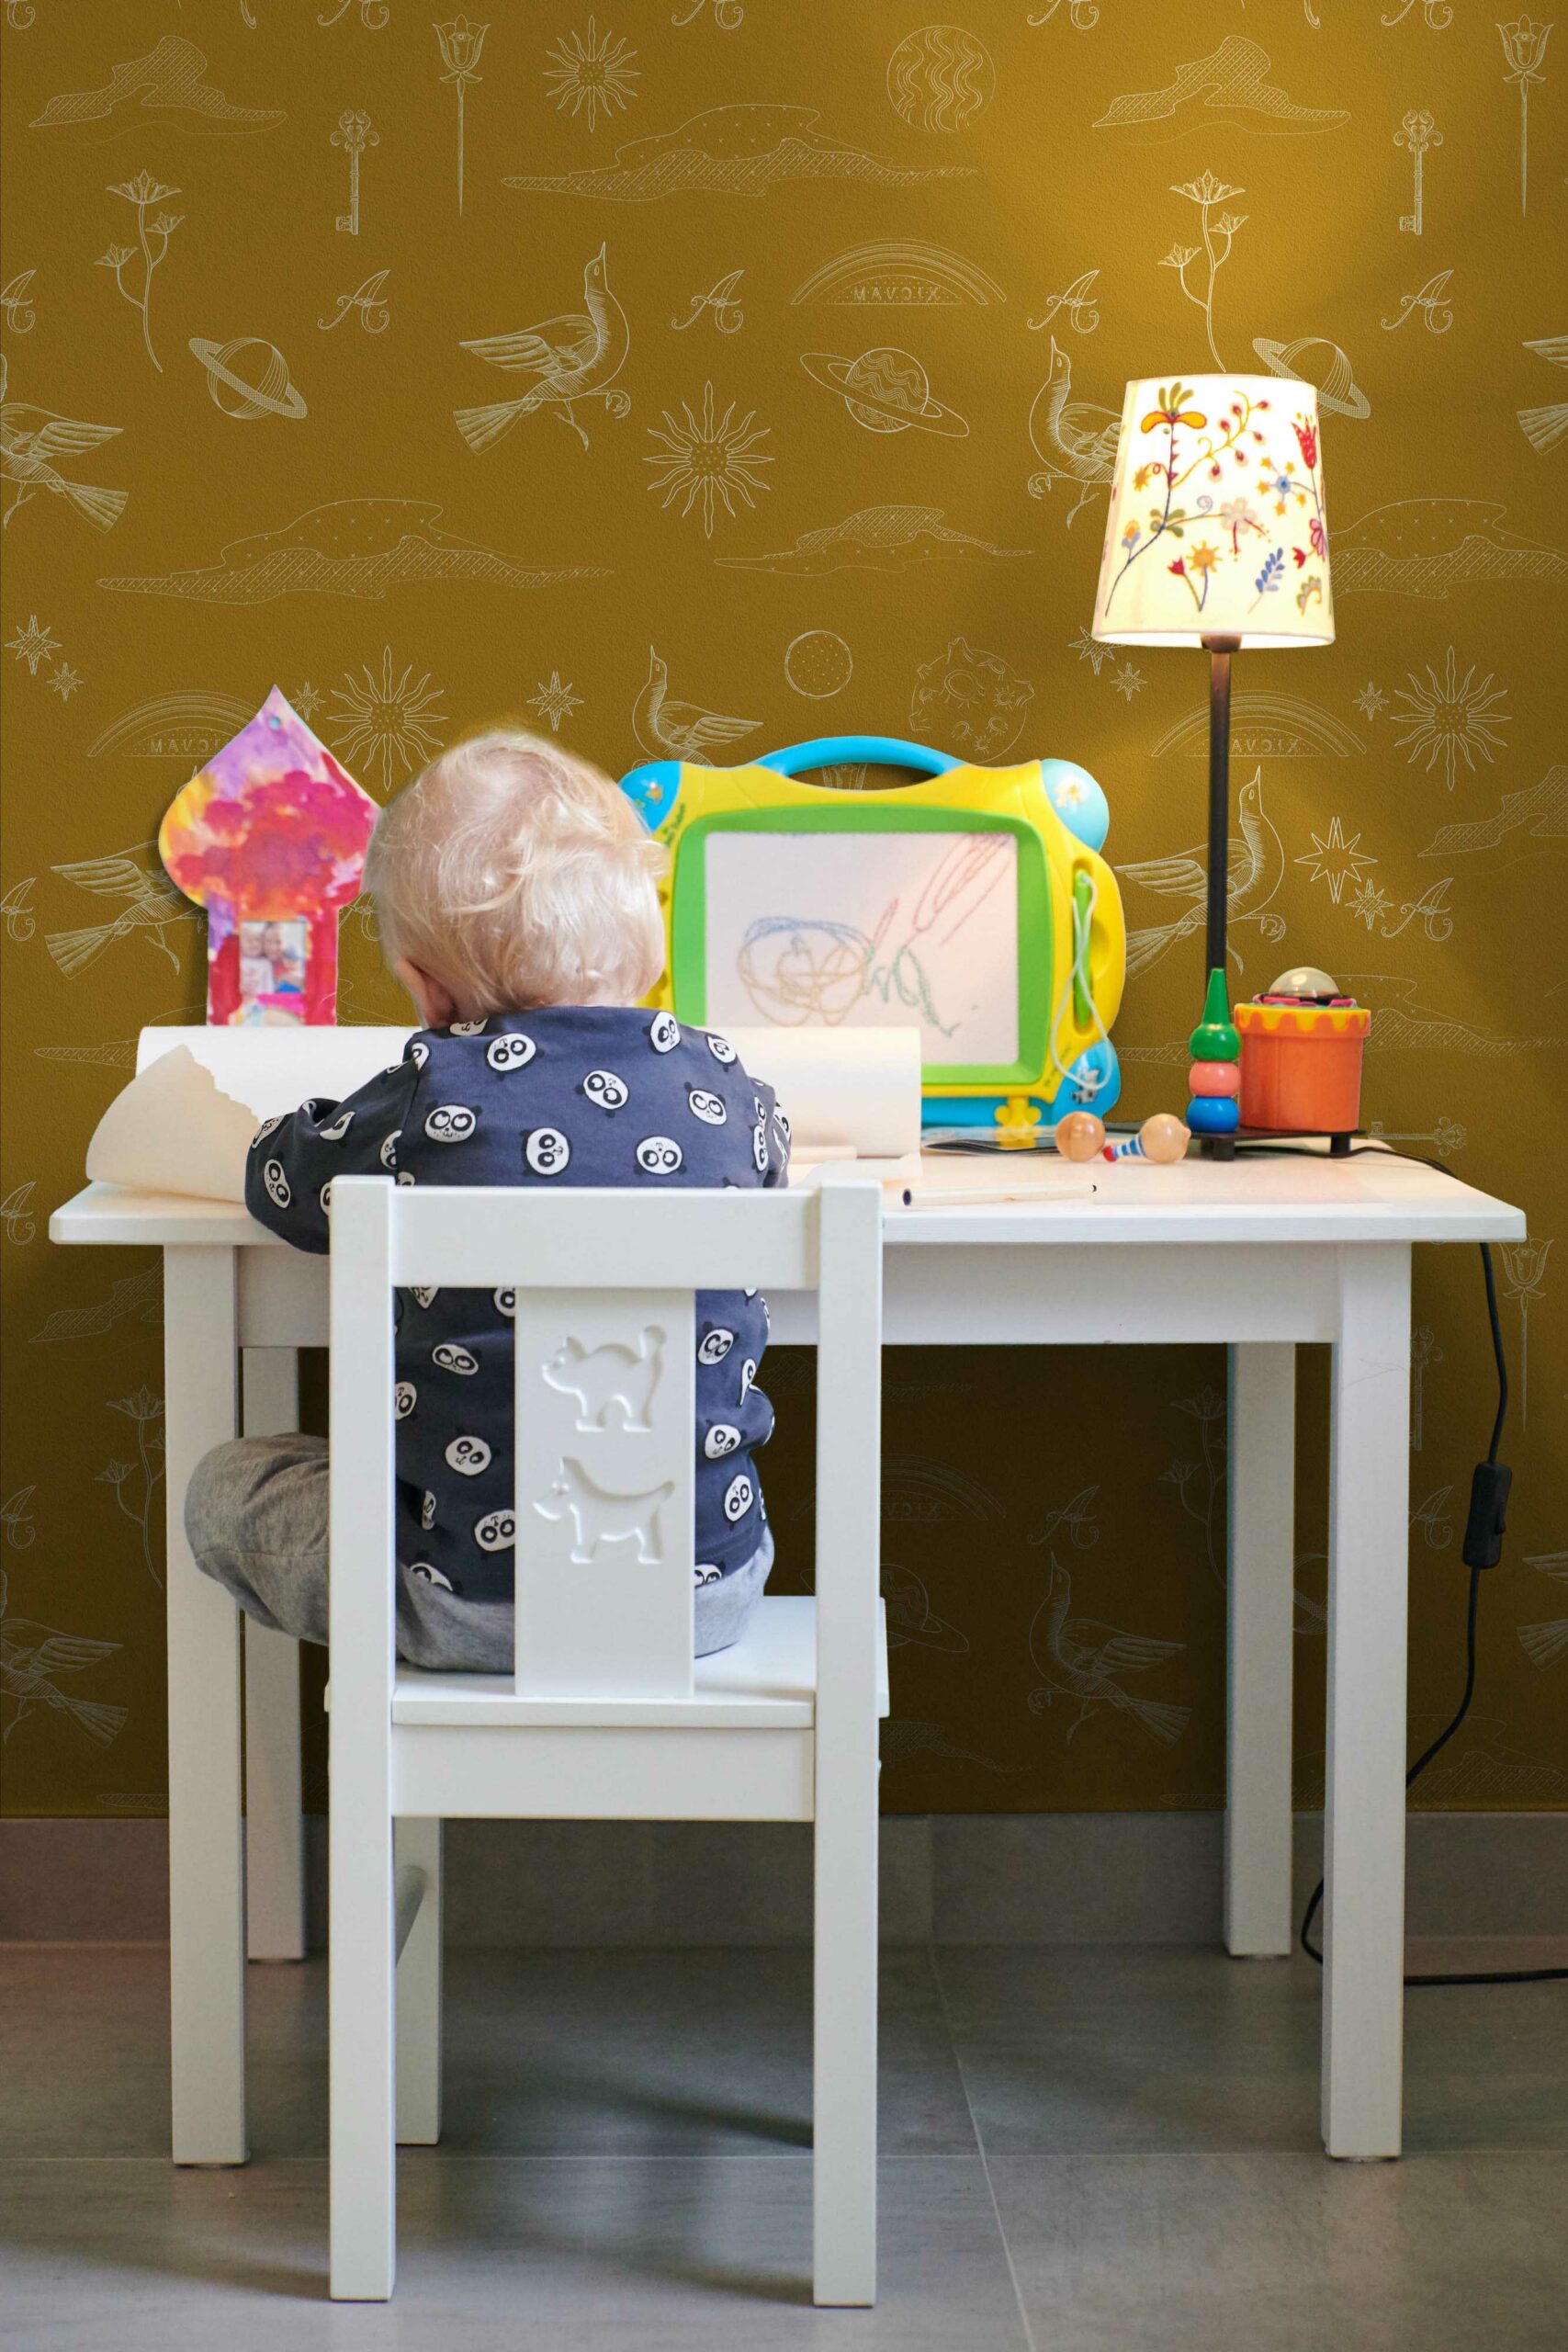 Wallpaper-Childreen-Room-decor-Les-Petits-staing-kids-room